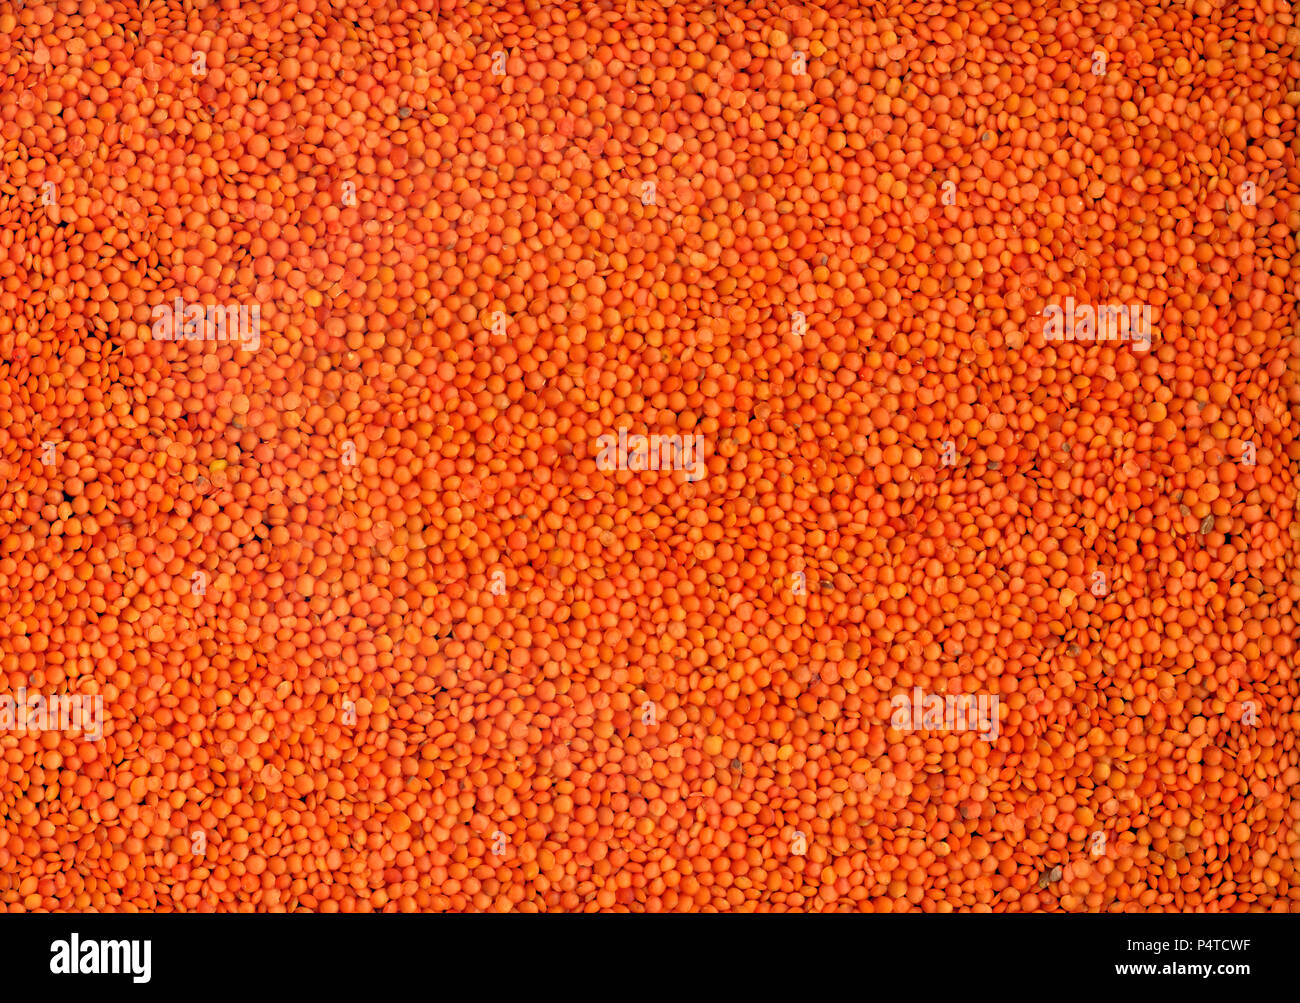 Background of red lentil fruits Stock Photo